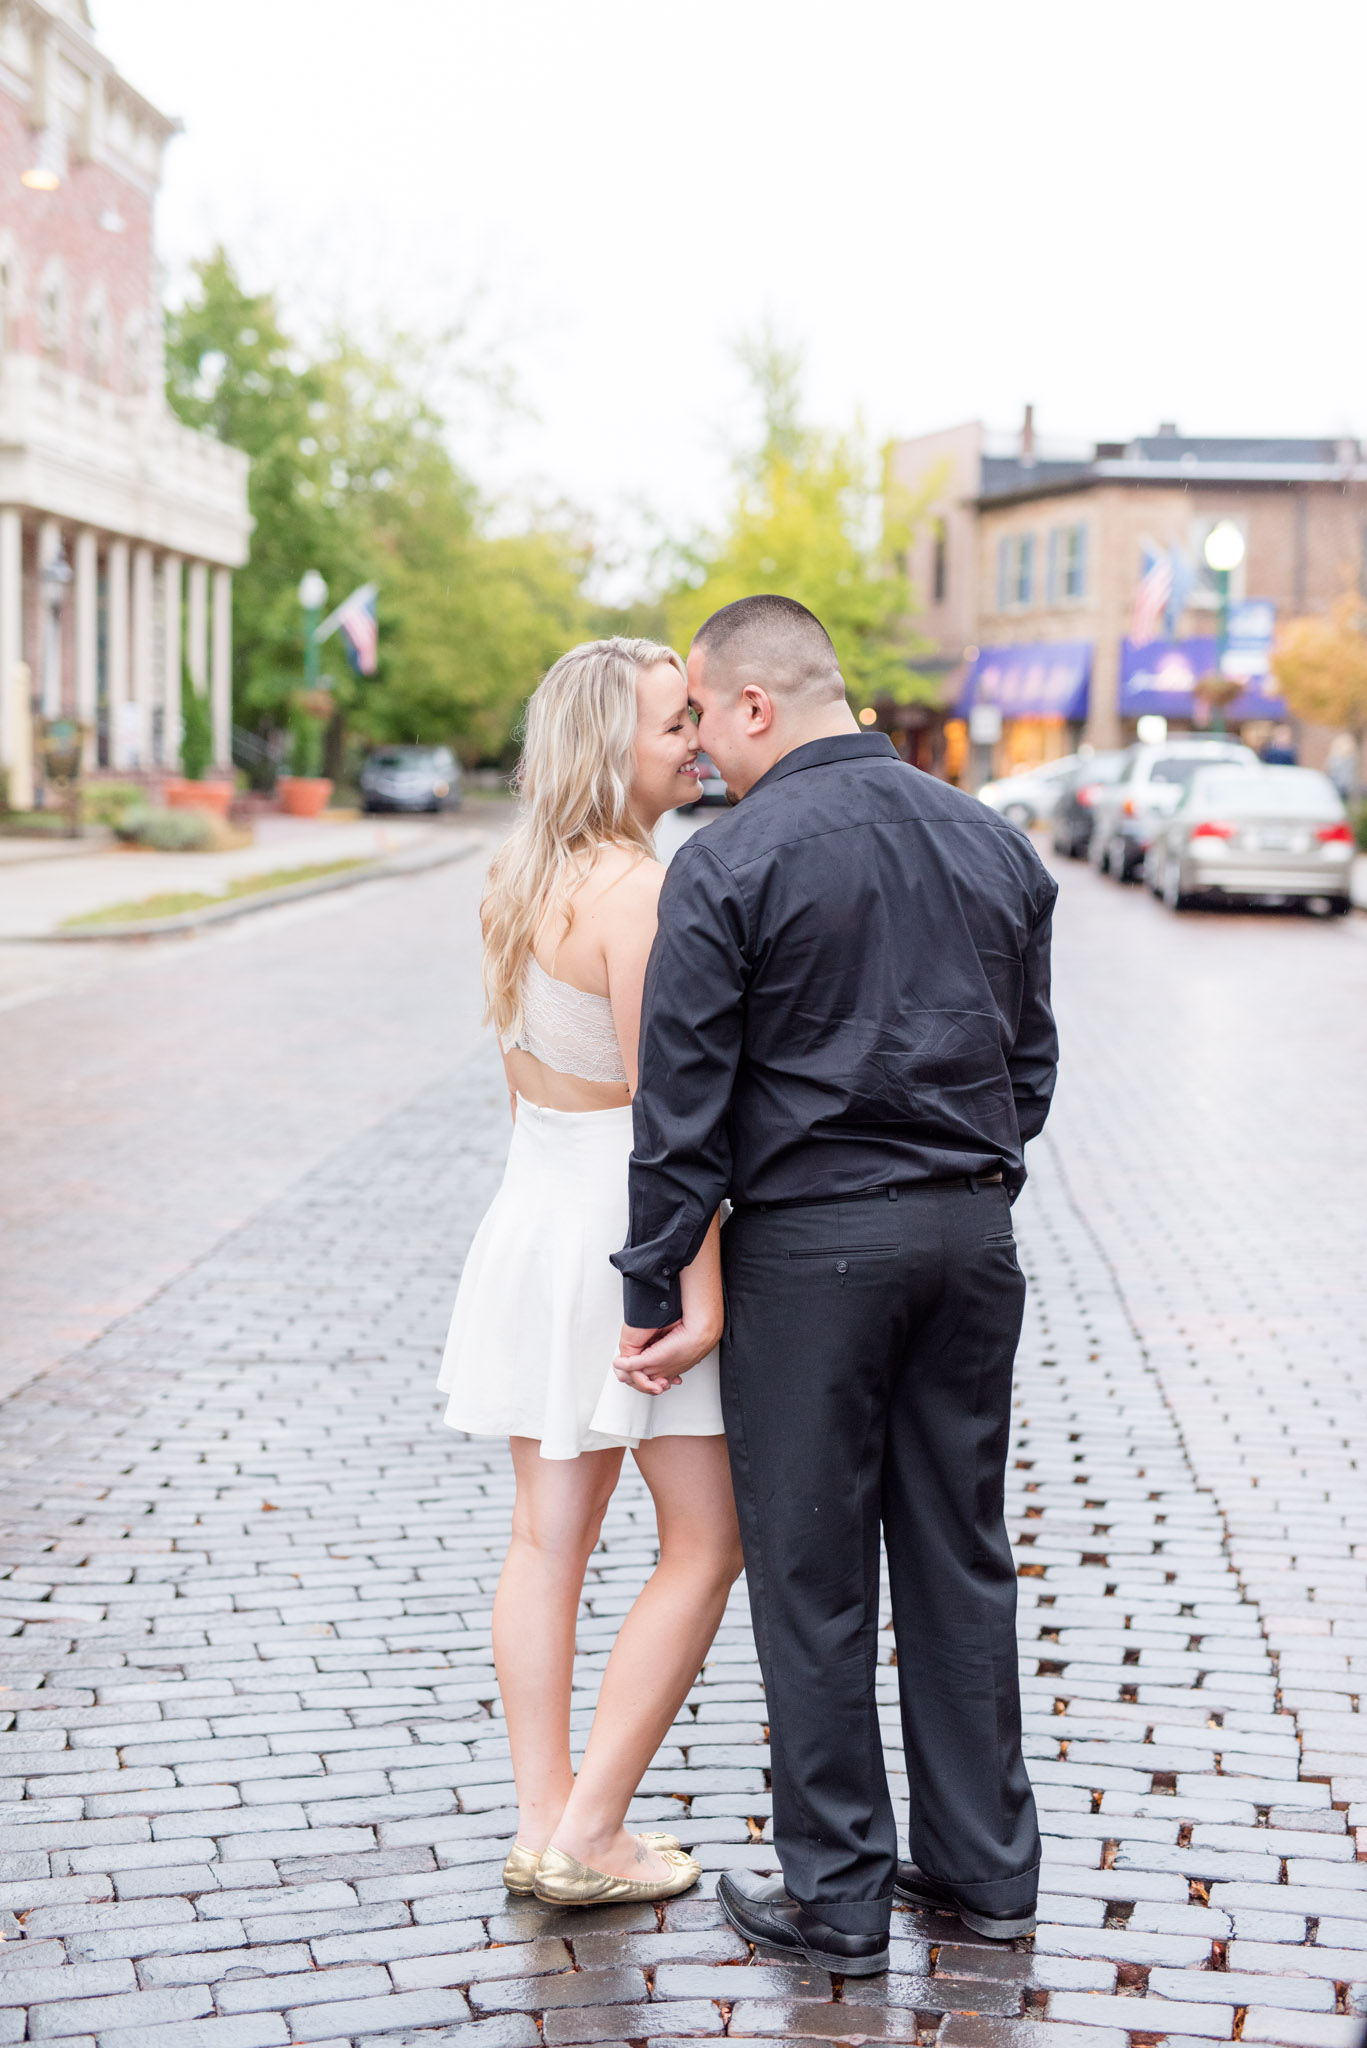 Engaged couple face away from camera on downtown street.